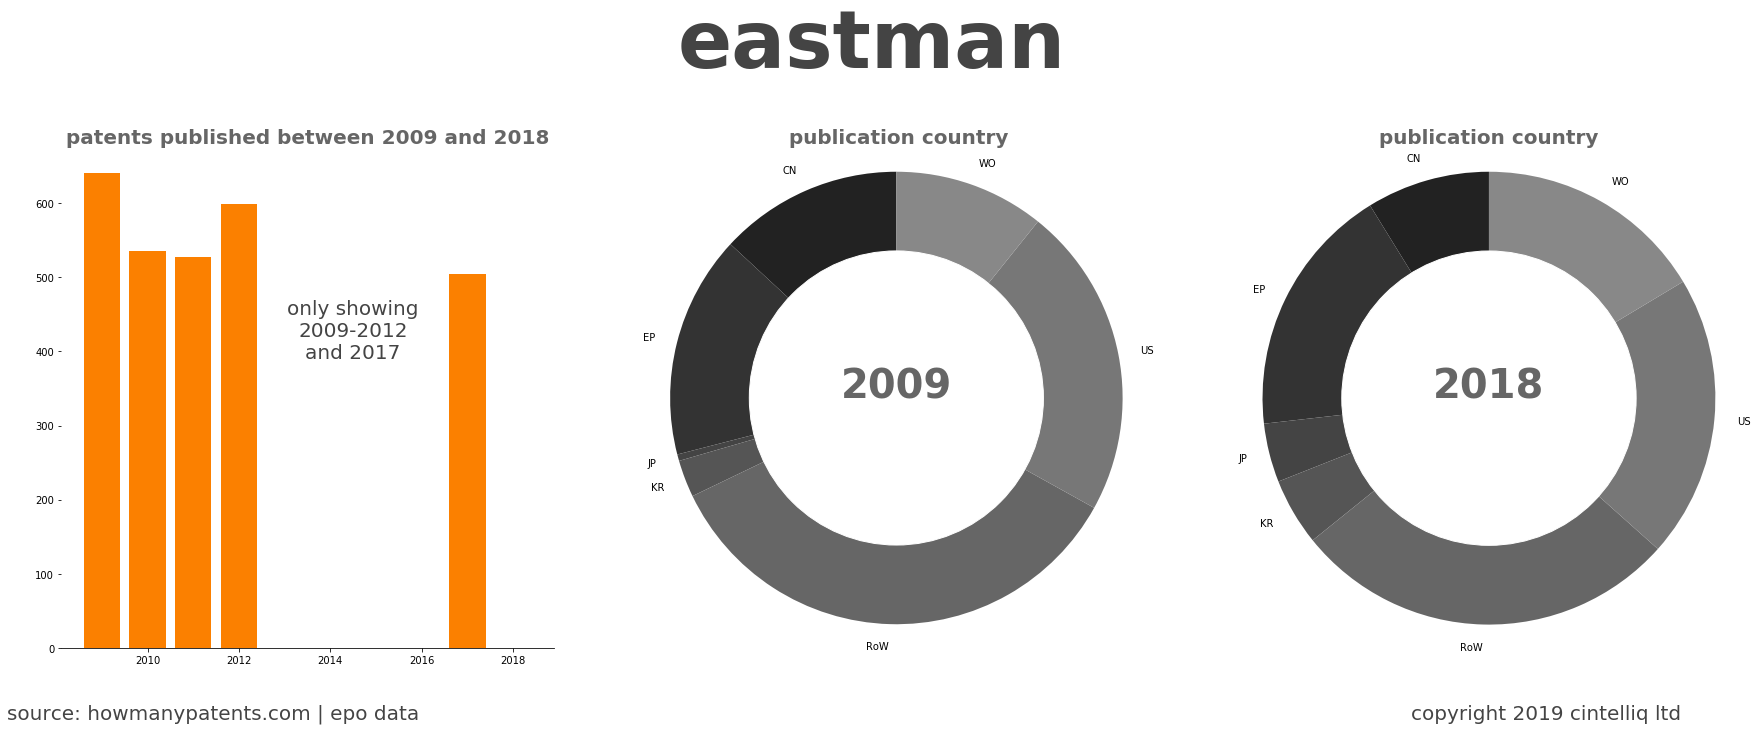 summary of patents for Eastman